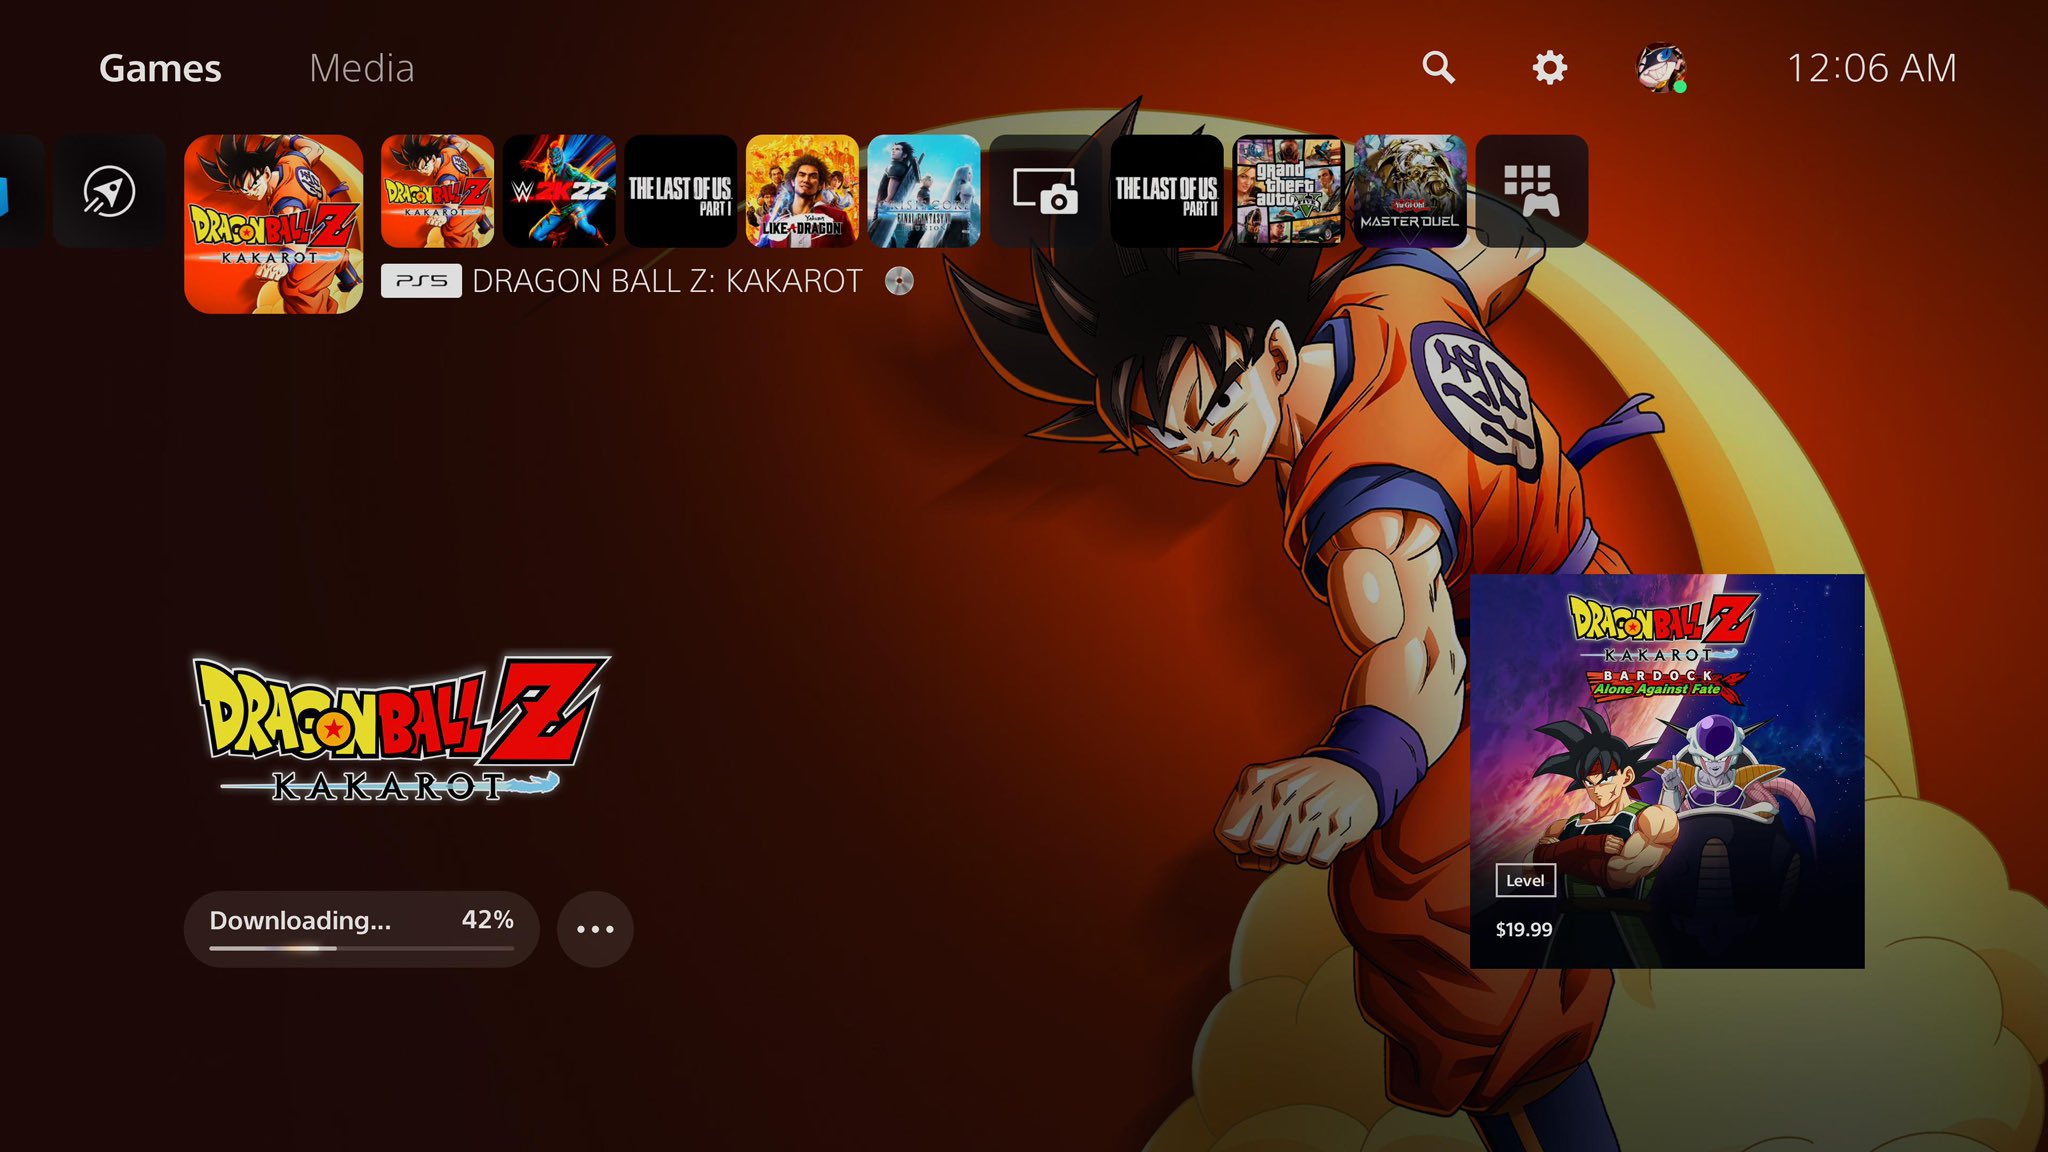 King Narukami on X: "The free PS5 upgrade for Dragon Ball Z: Kakarot is  AVAILABLE NOW IN THE US!!! https://t.co/PS7RkmLQ35" / X